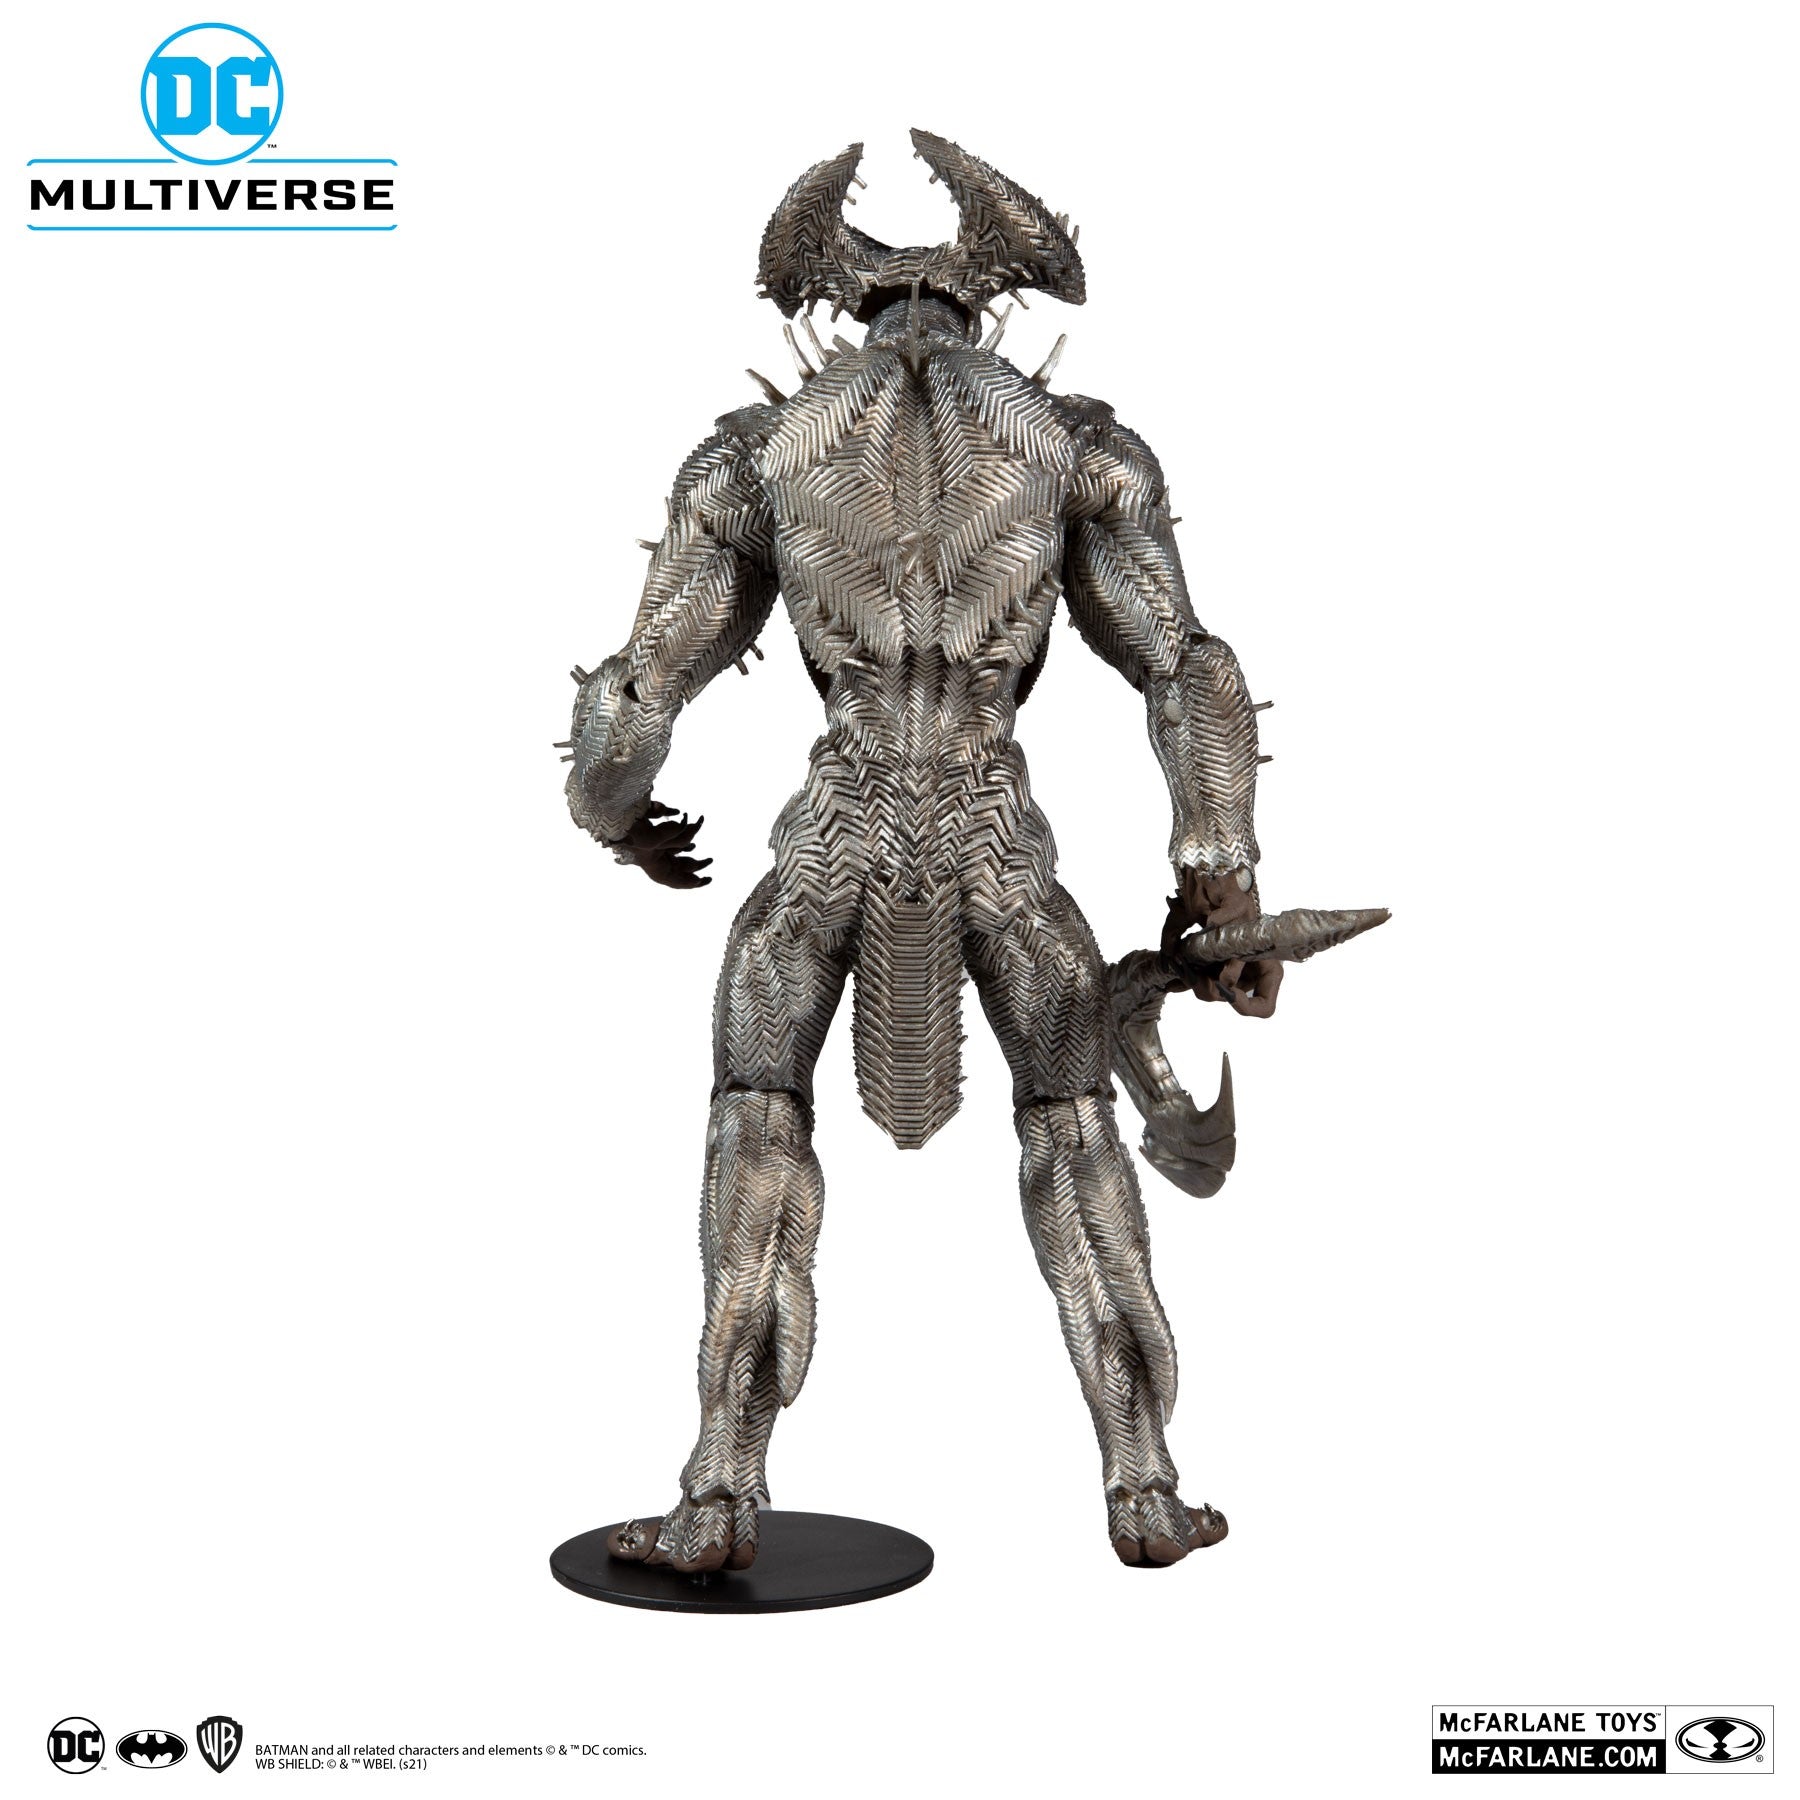 DC Multiverse Justice League Steppenwolf Megafig - McFarlane Toys-4